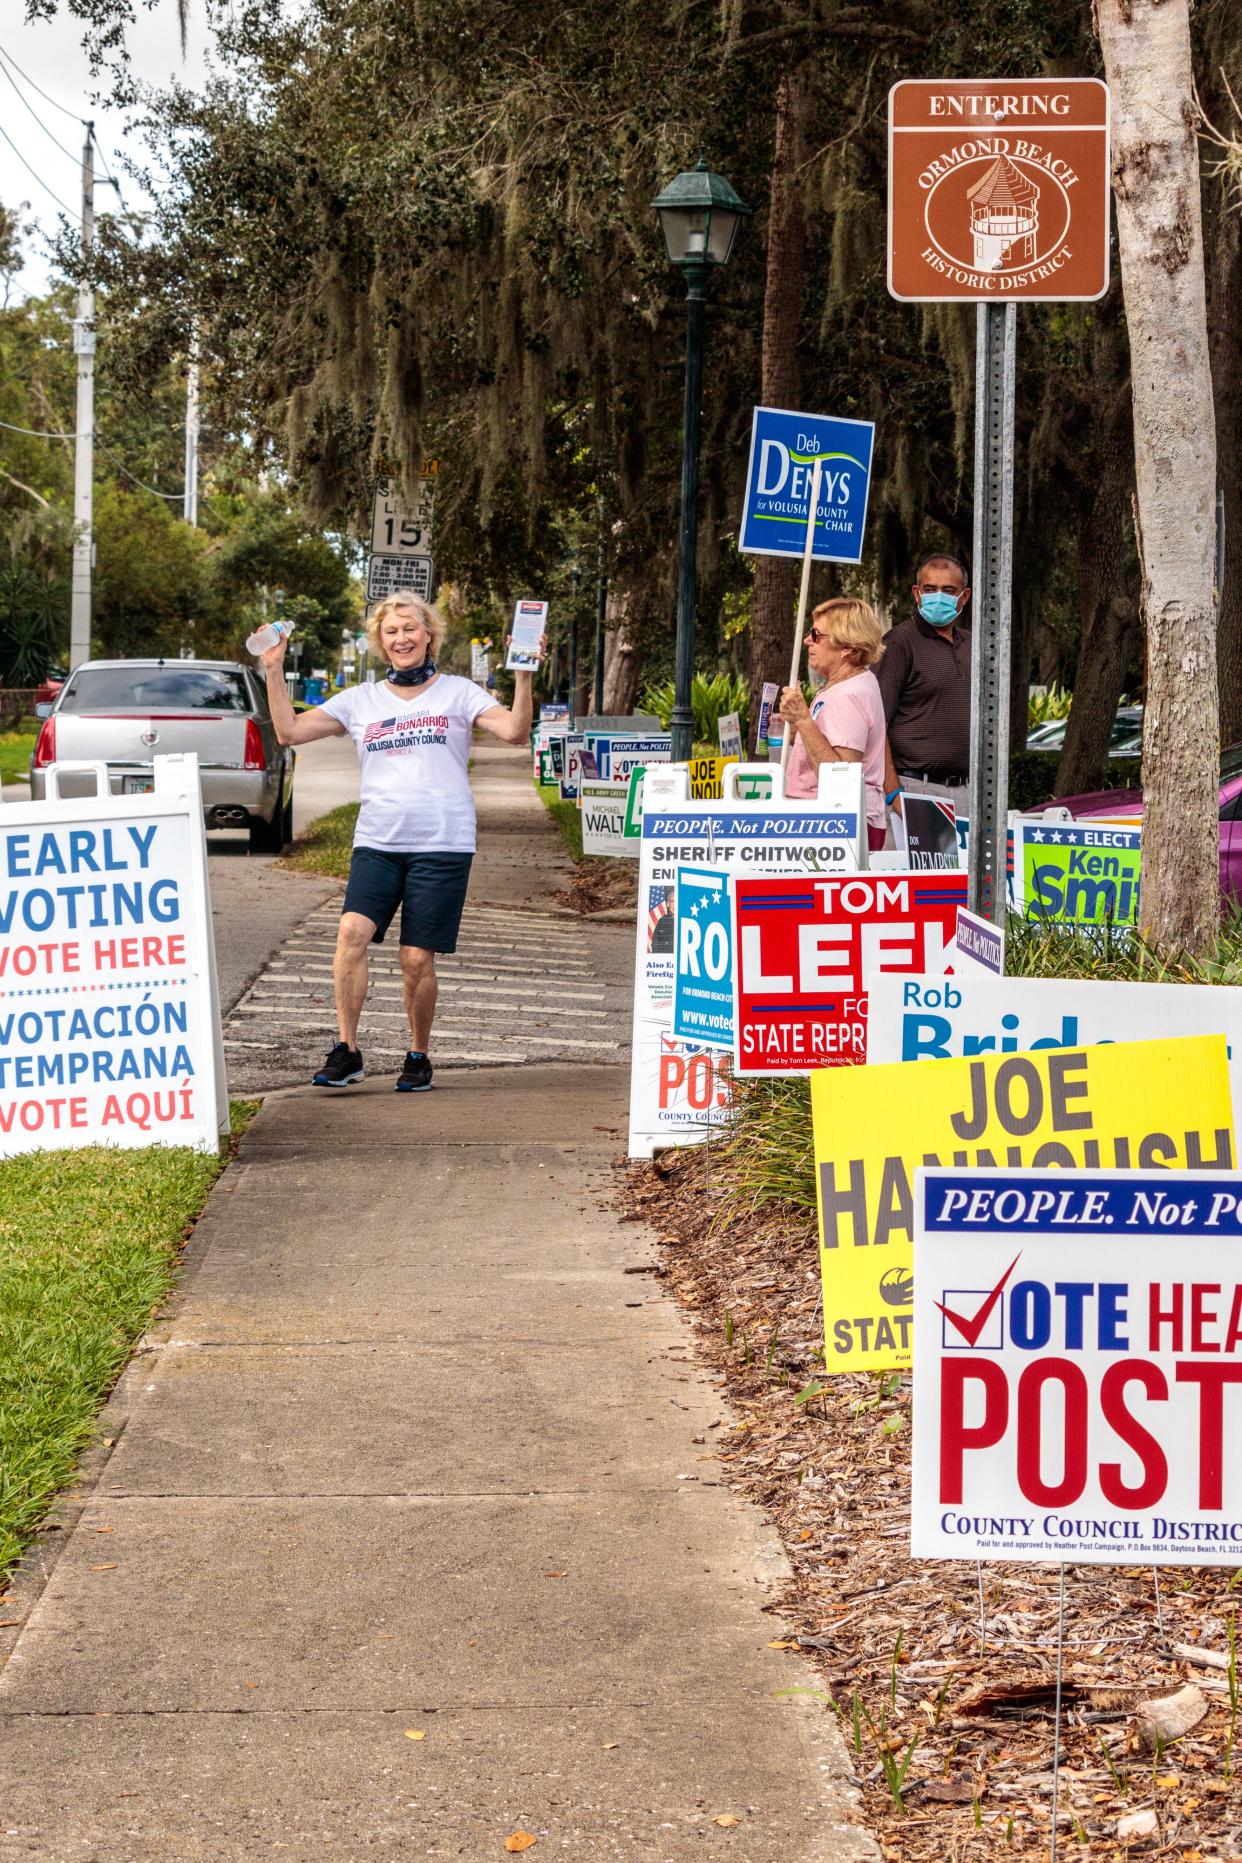 Campaigners make their last-ditch efforts to win over voters outside an early voting location in Ormond Beach in 2020.